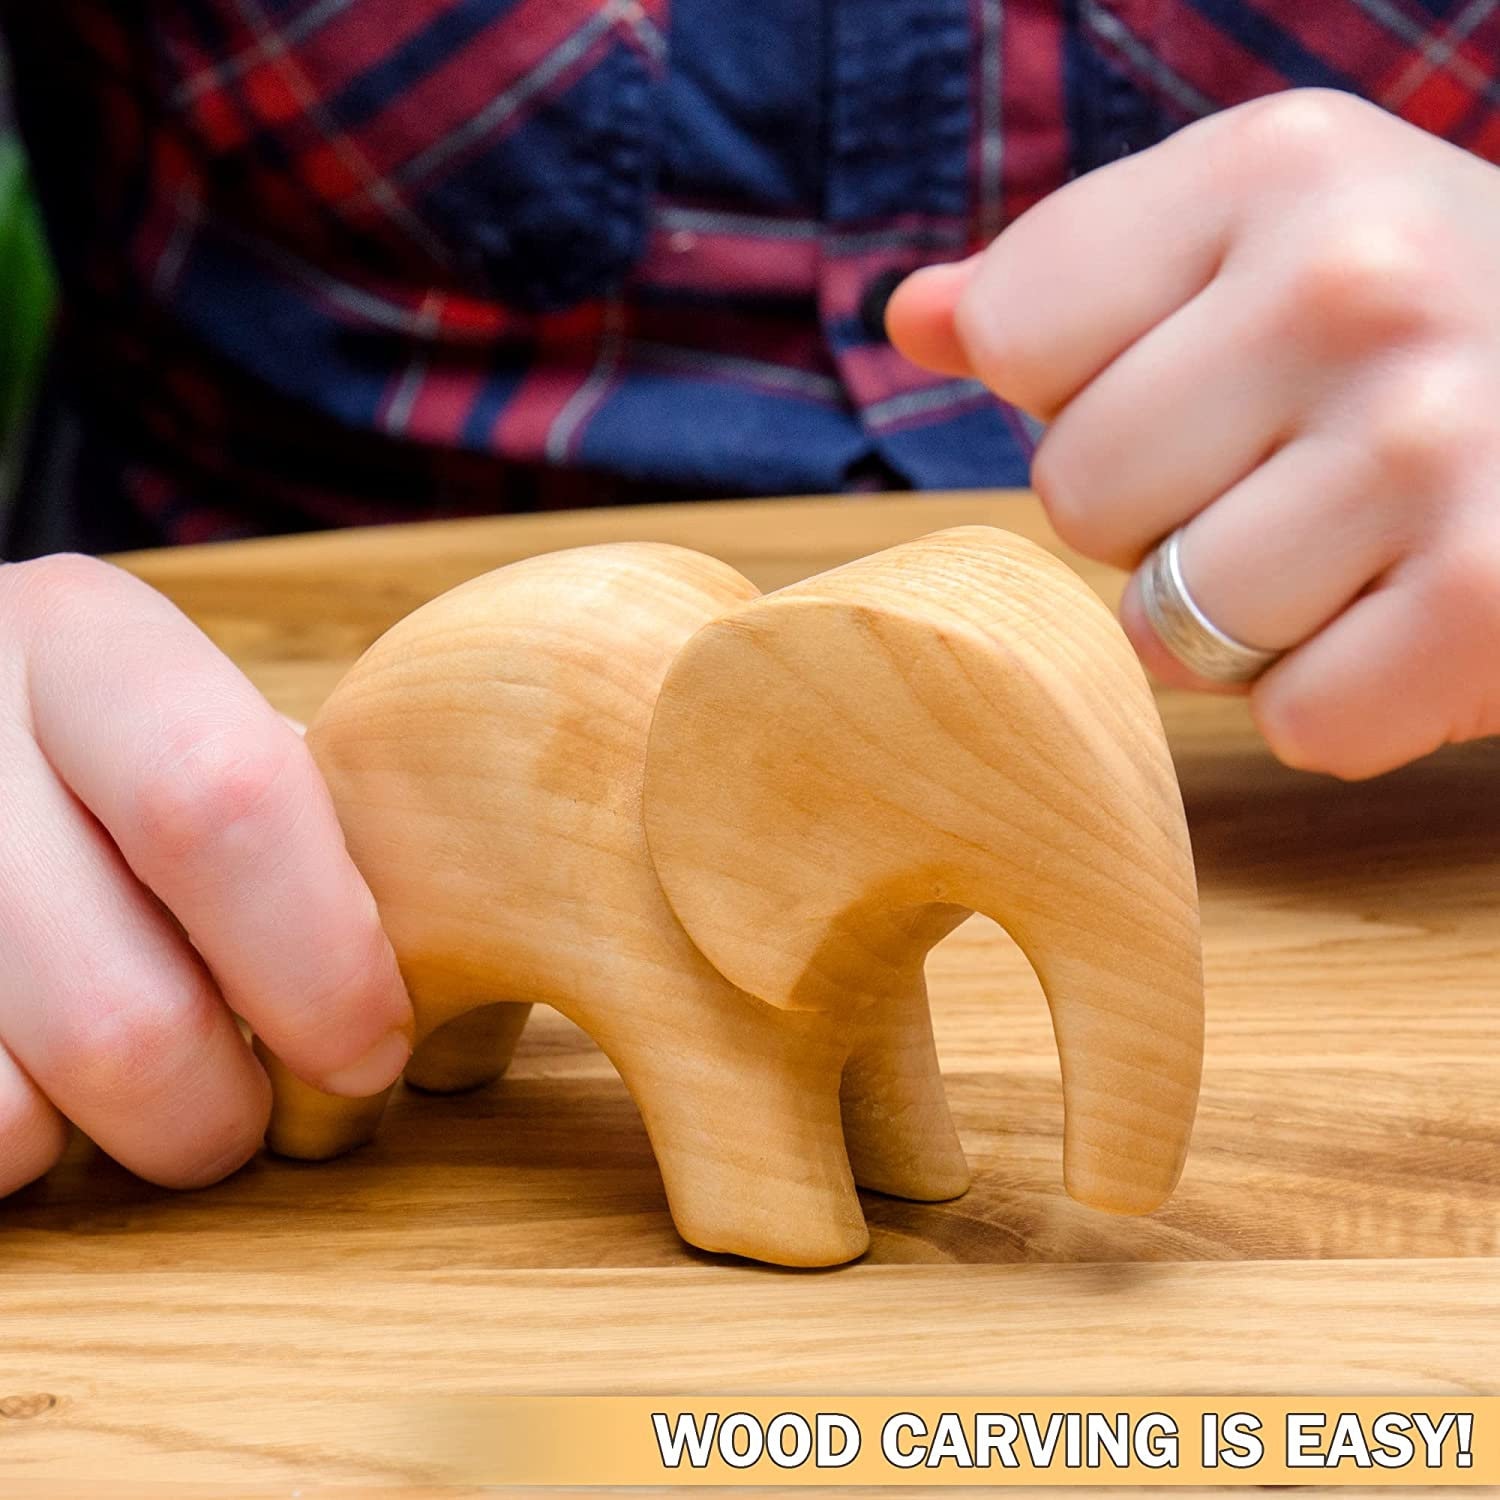 Wood Carving Kit for Beginners - Whittling kit with Rhino - Linden Woodworking  Kit for Kids, Adults - Wood Carving Stainless Steel Knife with Wooden  Handle-Rhino Shaped Linden Blank